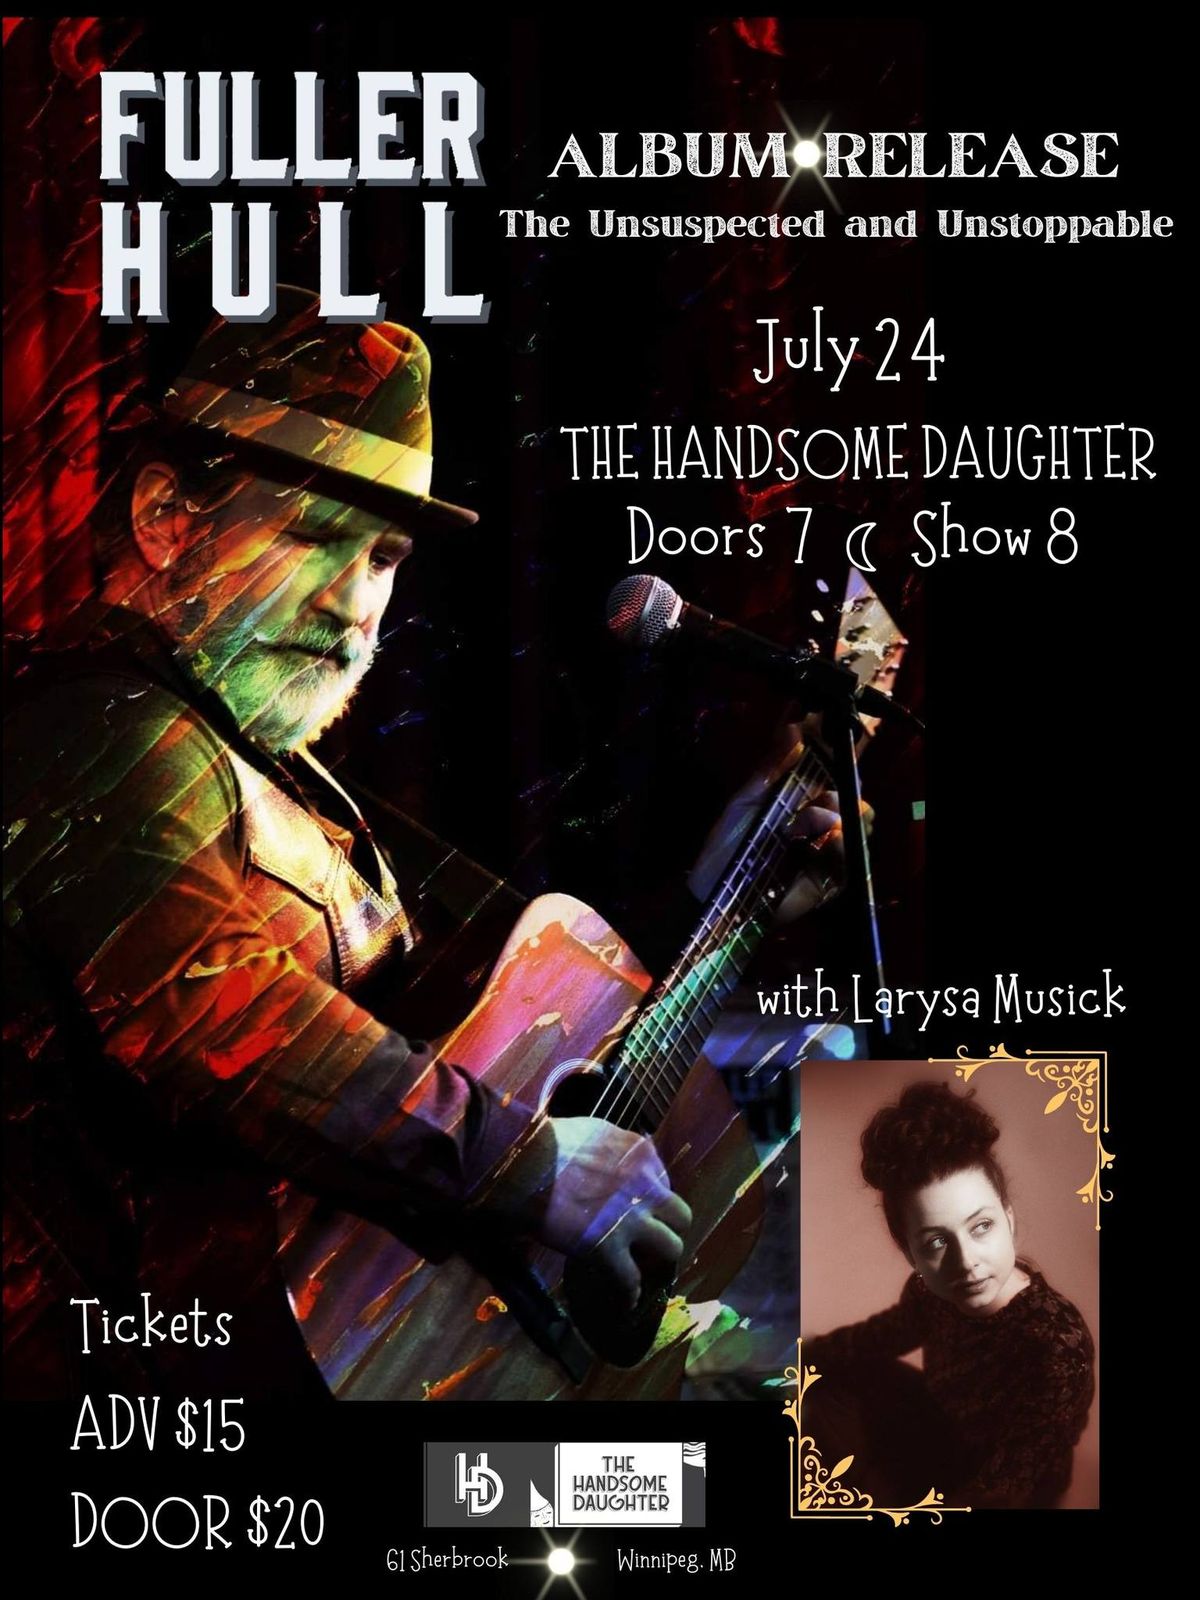 Fuller Hull Album Release: The Unsuspected and Unstoppable